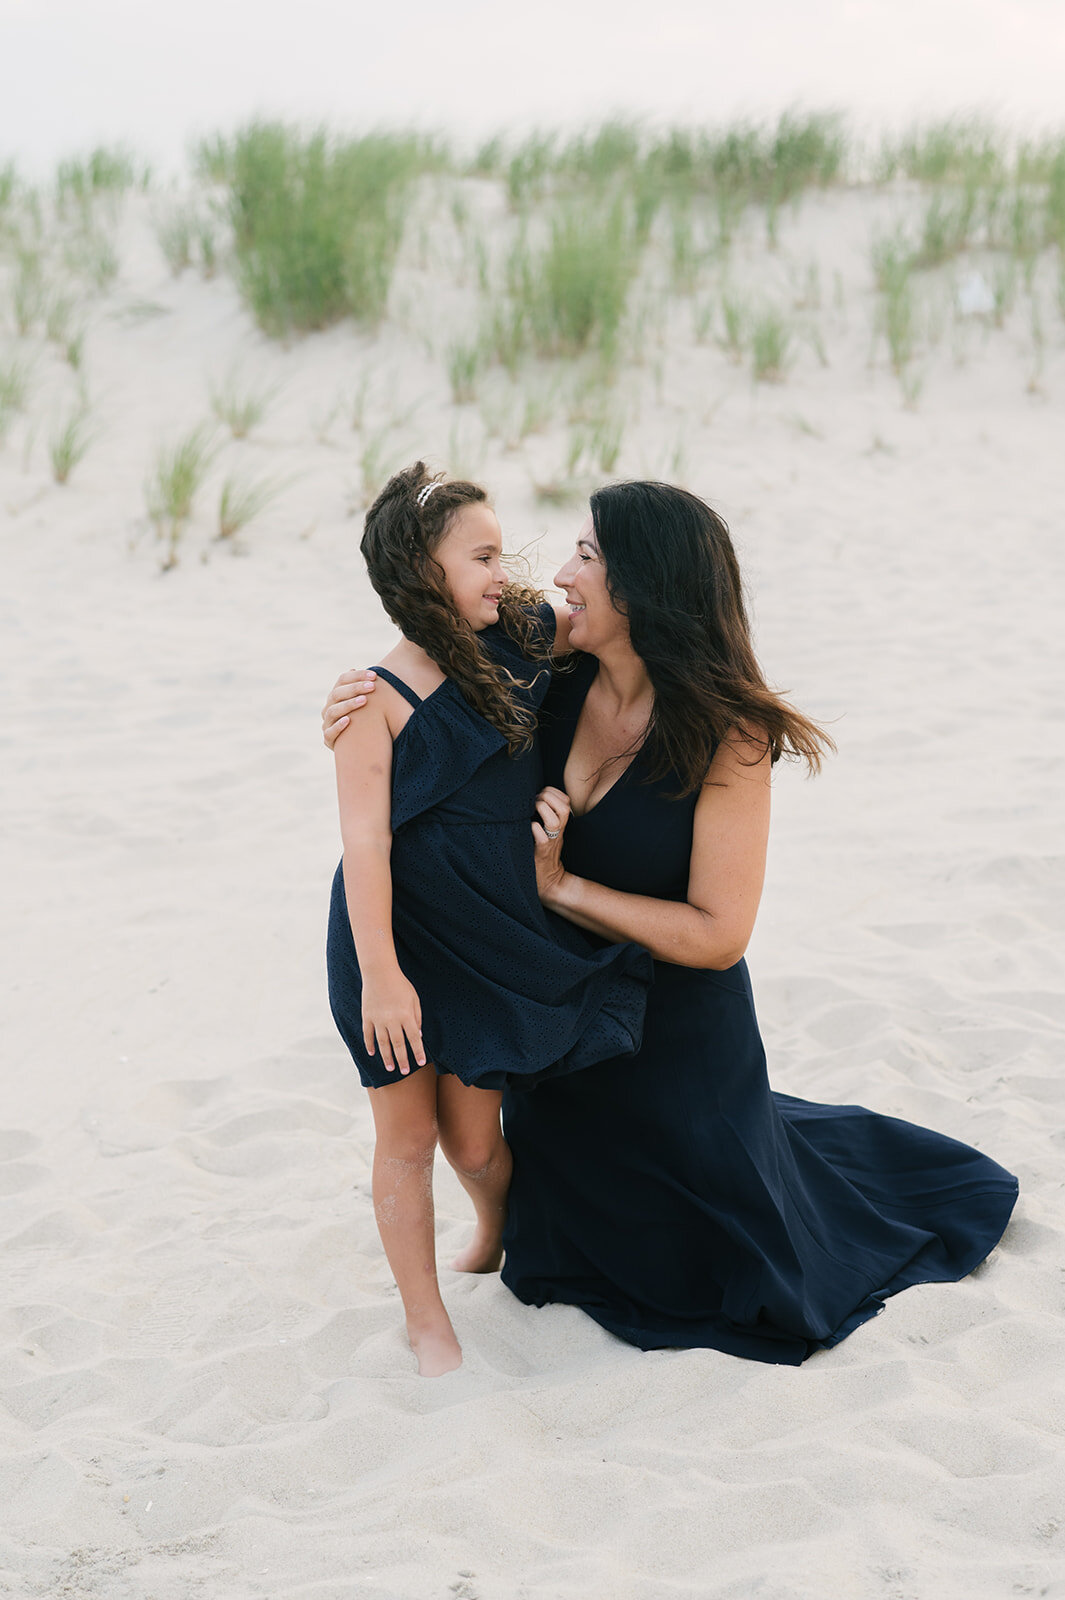 Beach photo ideas: mom and daughter in black dresses during beach photos  | NKB Photo